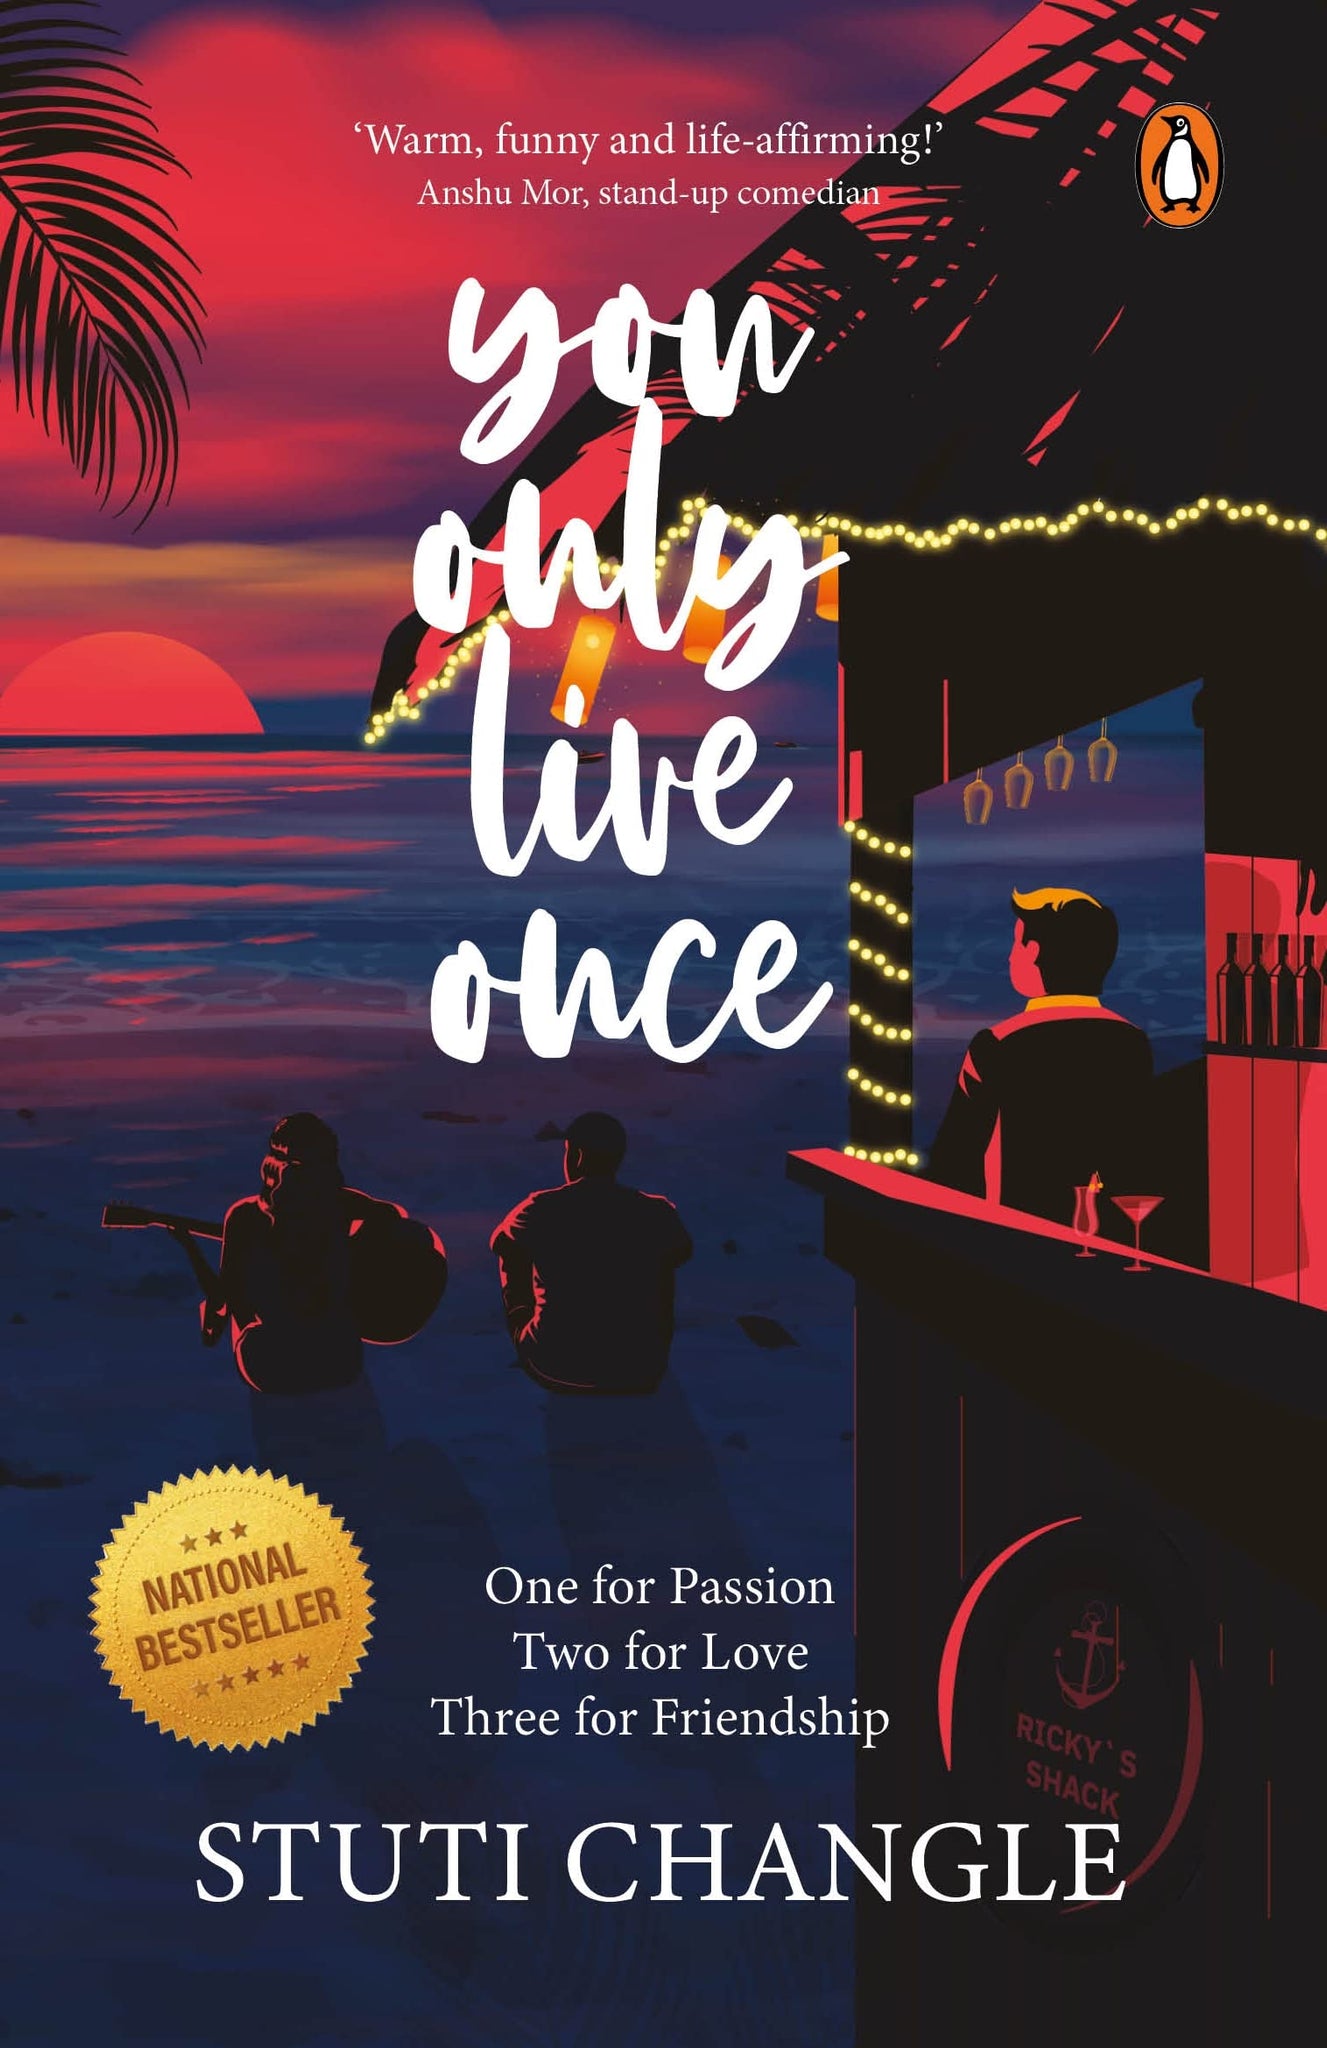 for　Passion　Champaca　One　Friendship　for　Bookstore,　You　Two　Love　Library　Three　–　Only　Cafe　Live　Once:　for　and